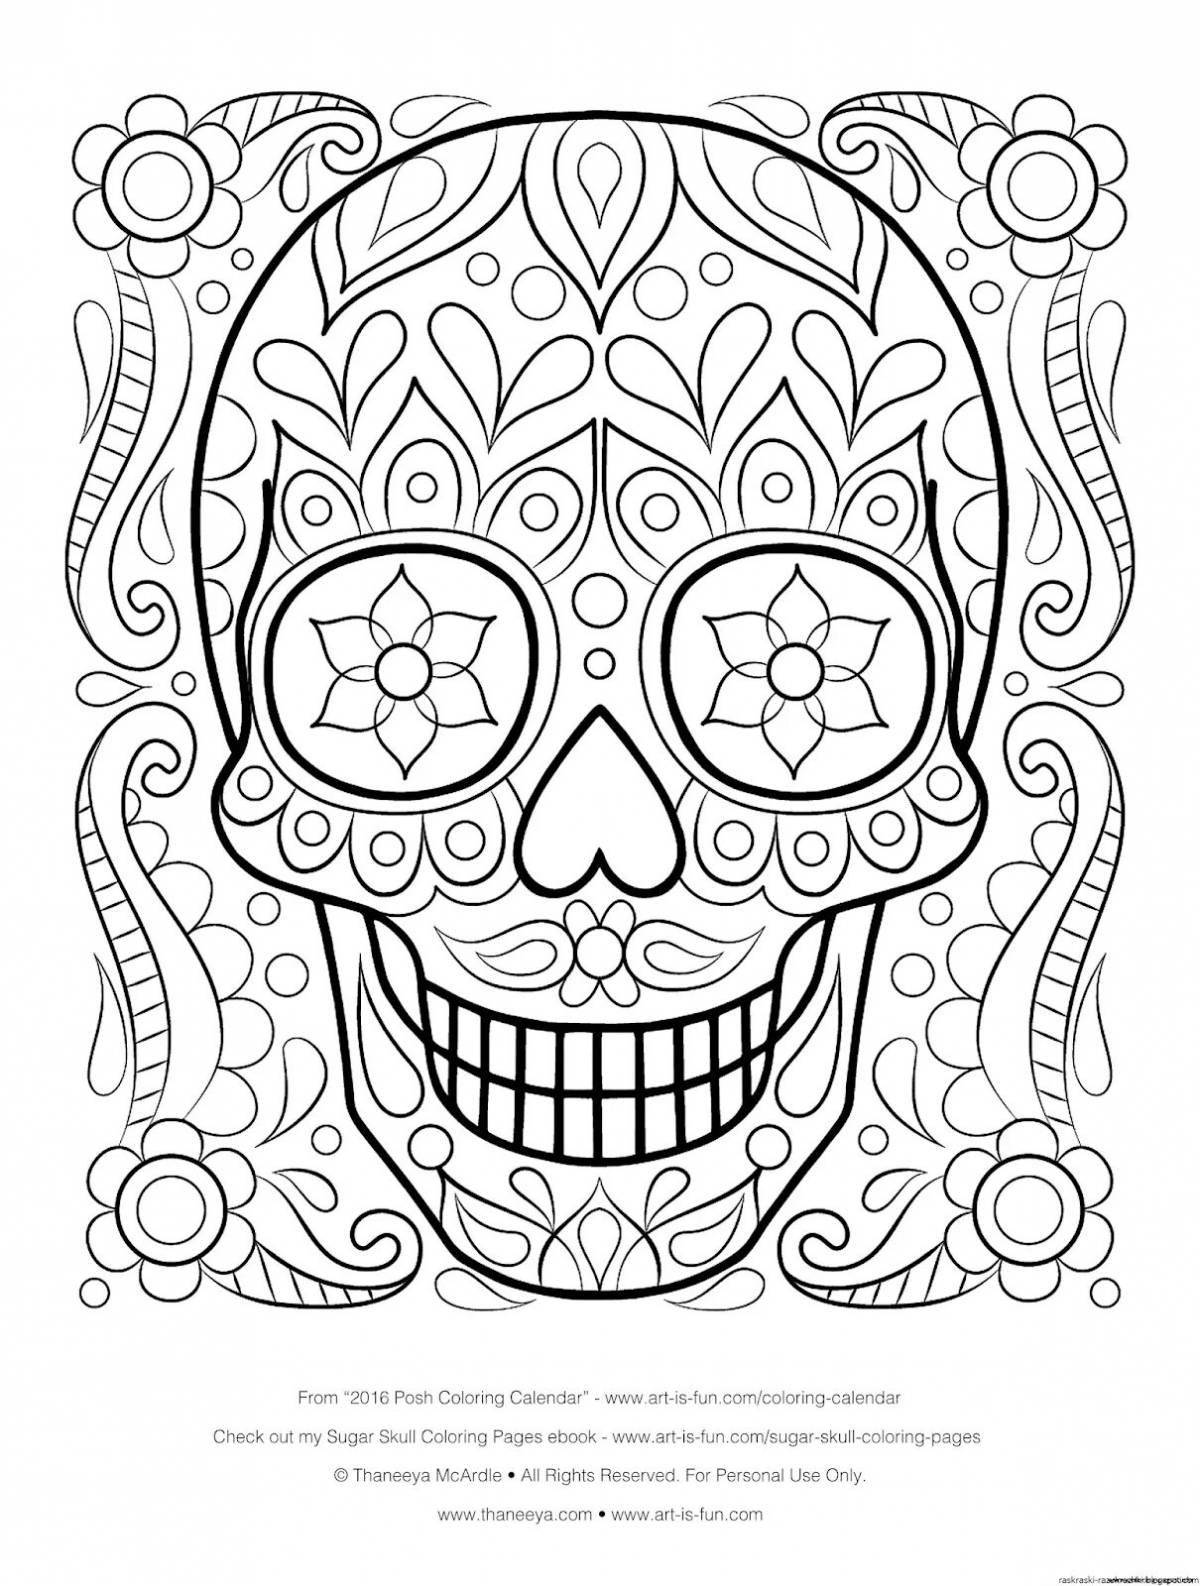 Coloring book for girls 14 years old